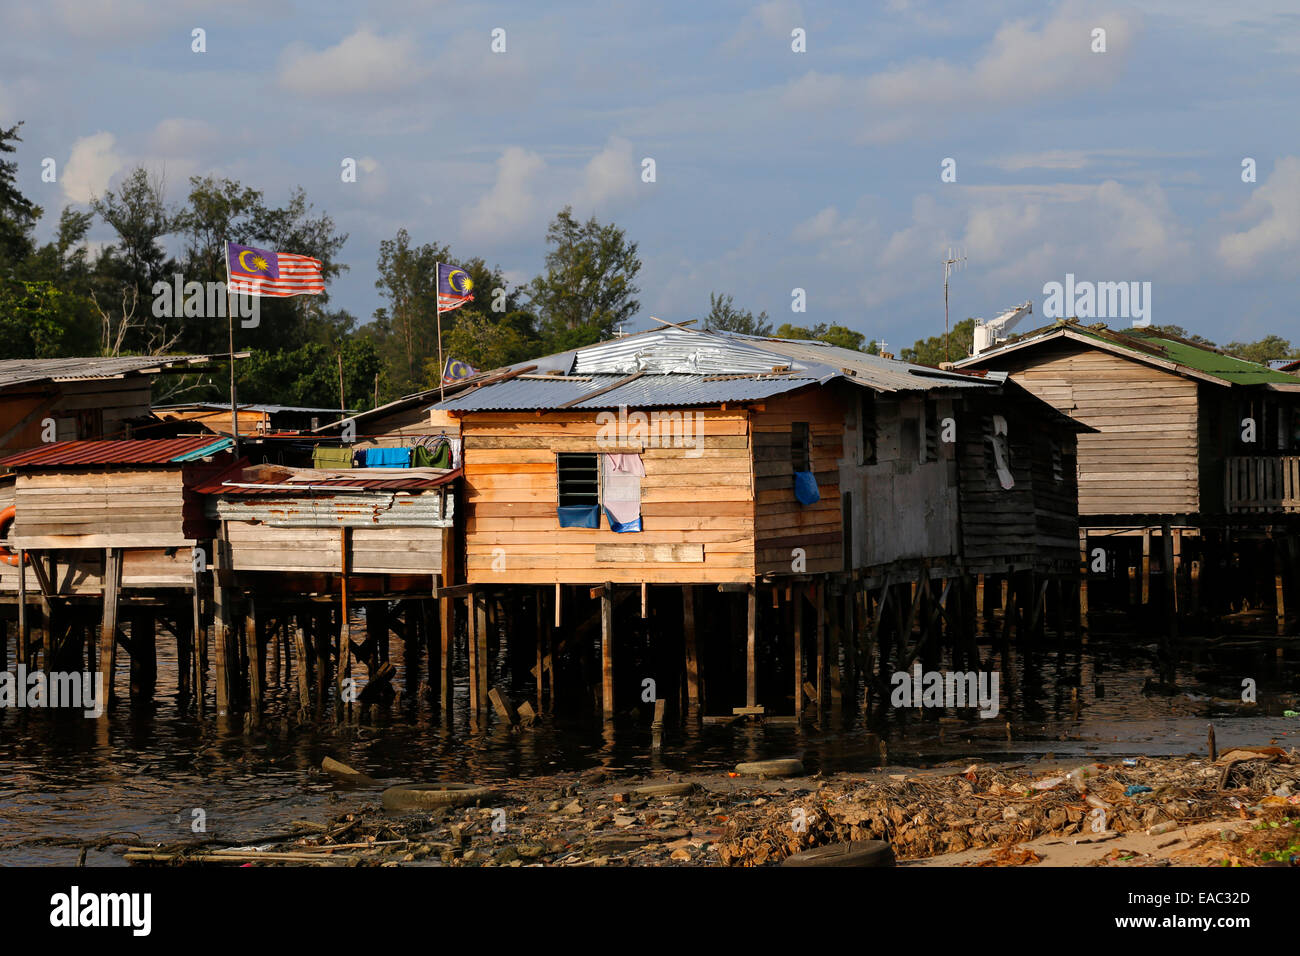 Page 2 Kampung High Resolution Stock Photography And Images Alamy